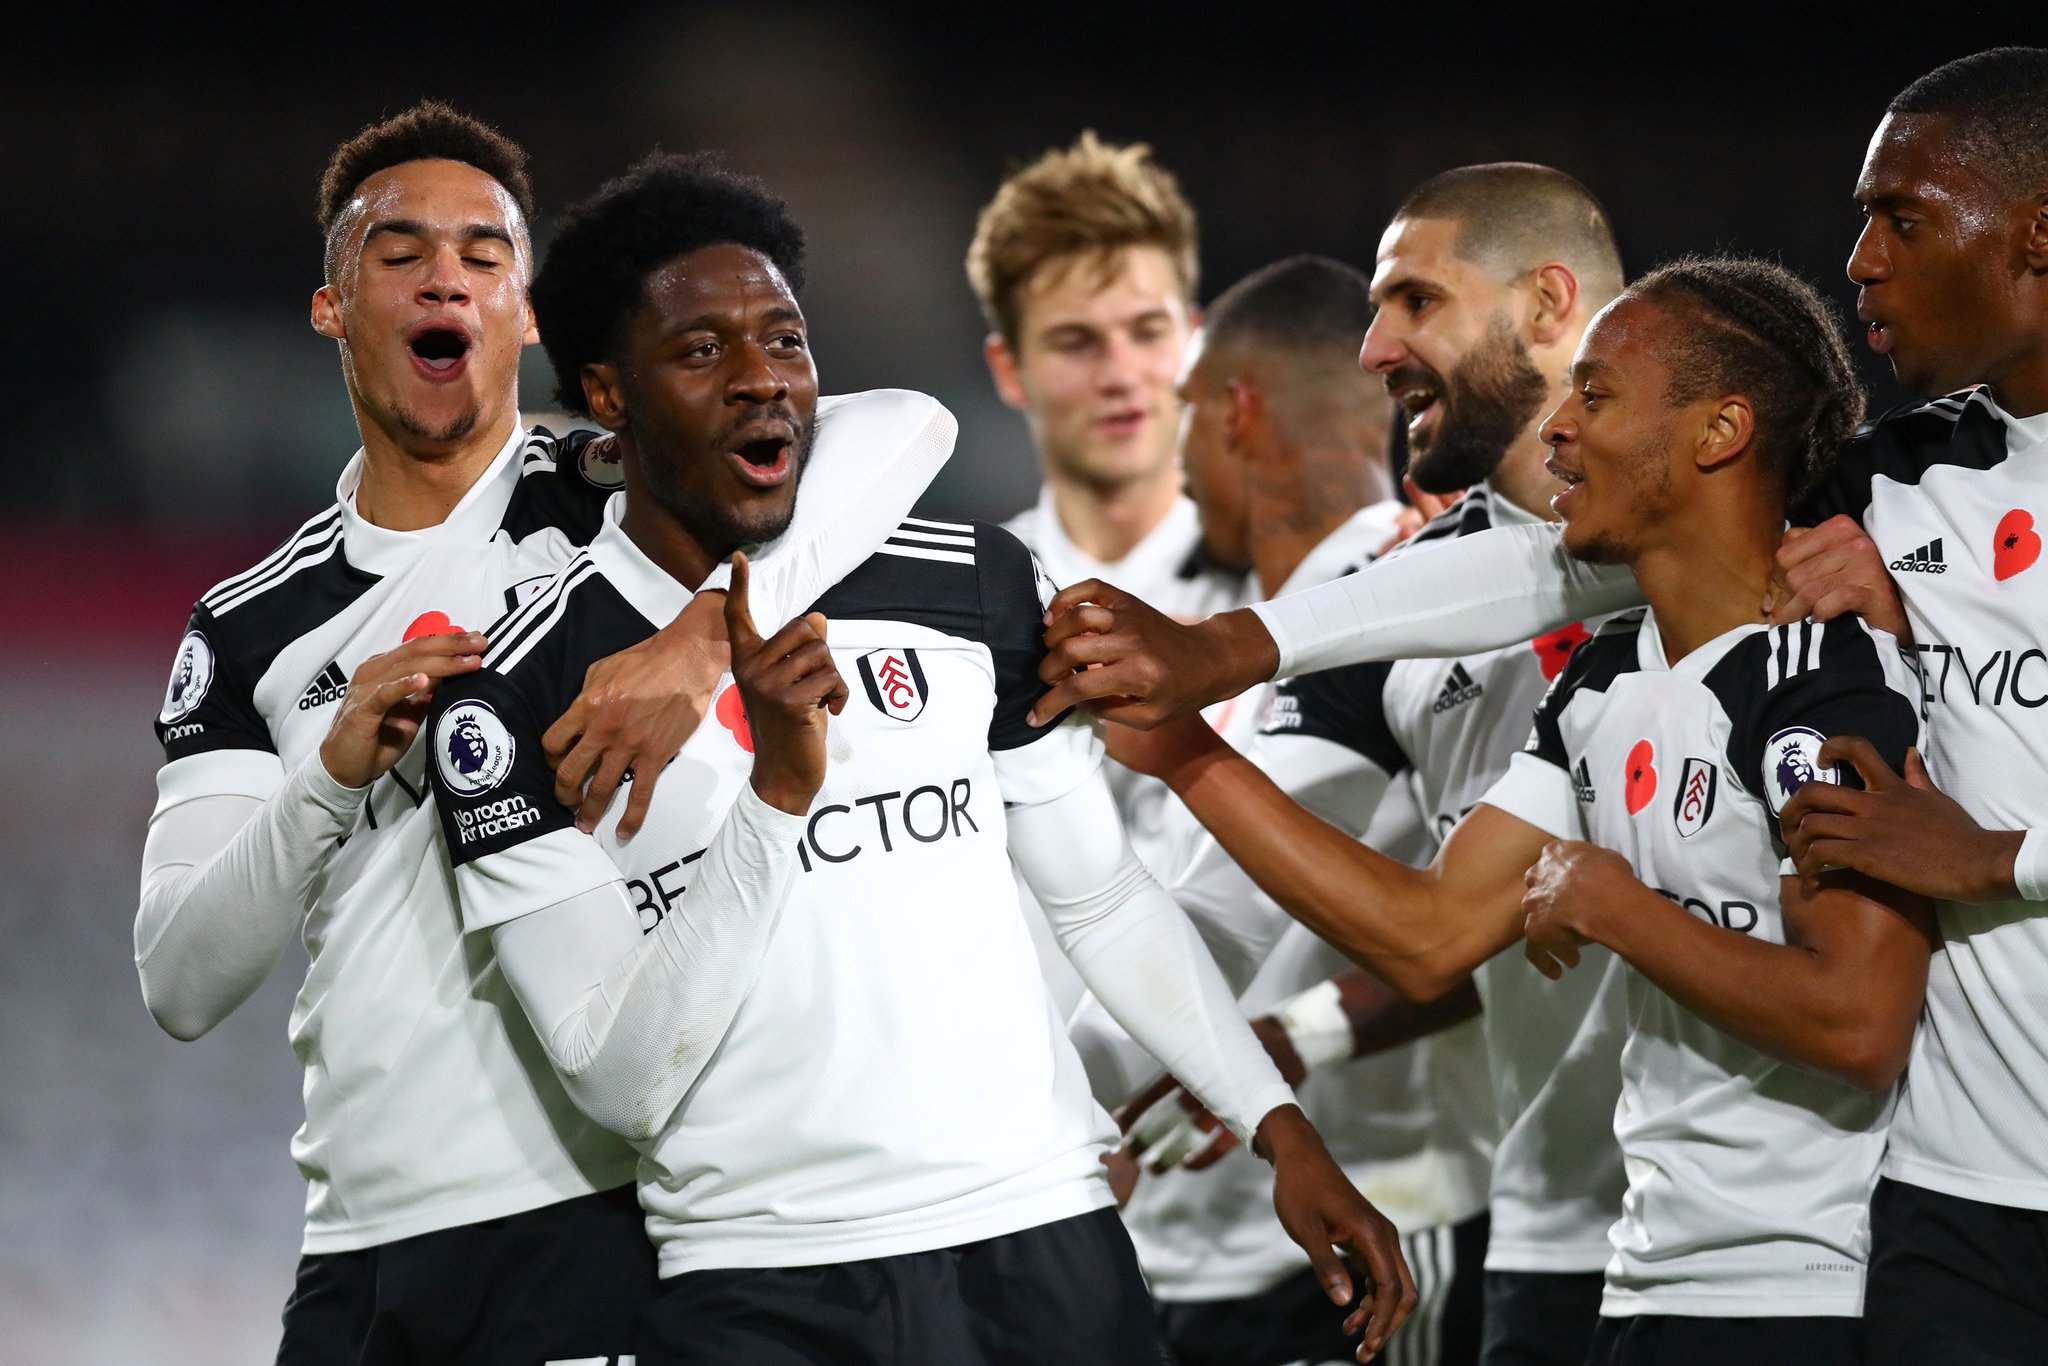 Premier League: Aina On Target, Ajayi In Action As Fulham Beat West Brom To Claim First Win